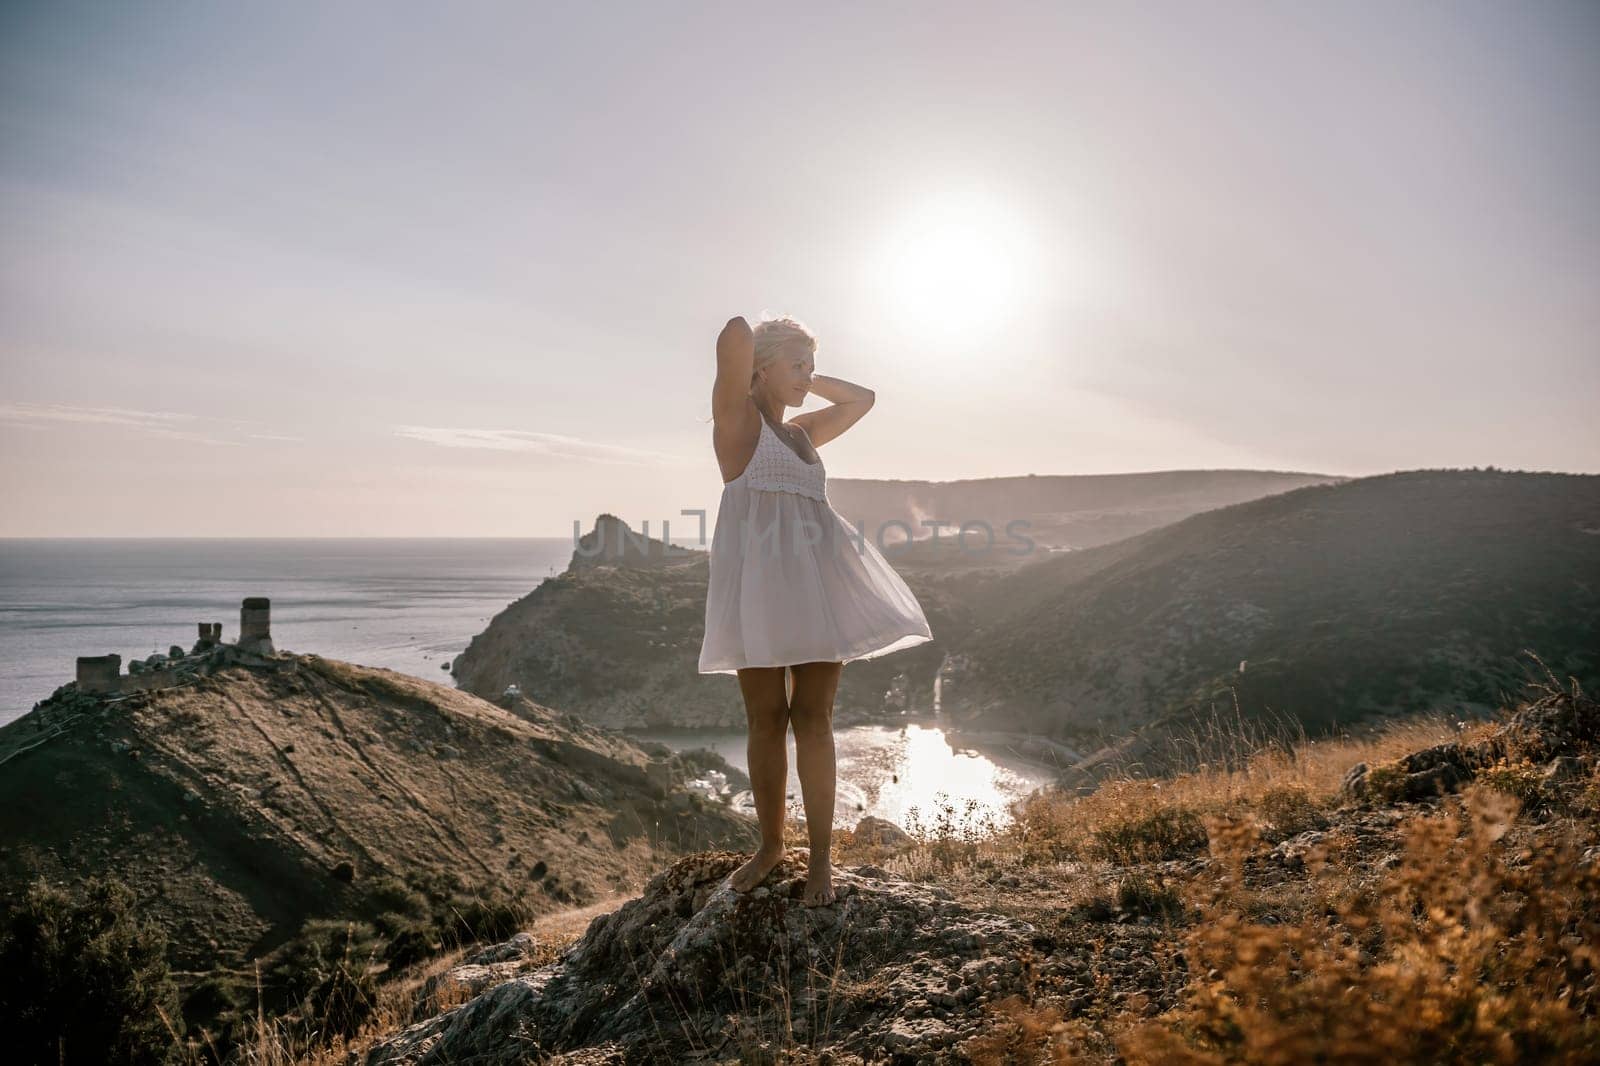 A blonde woman stands on a hill overlooking the ocean. She is wearing a white dress and she is enjoying the view